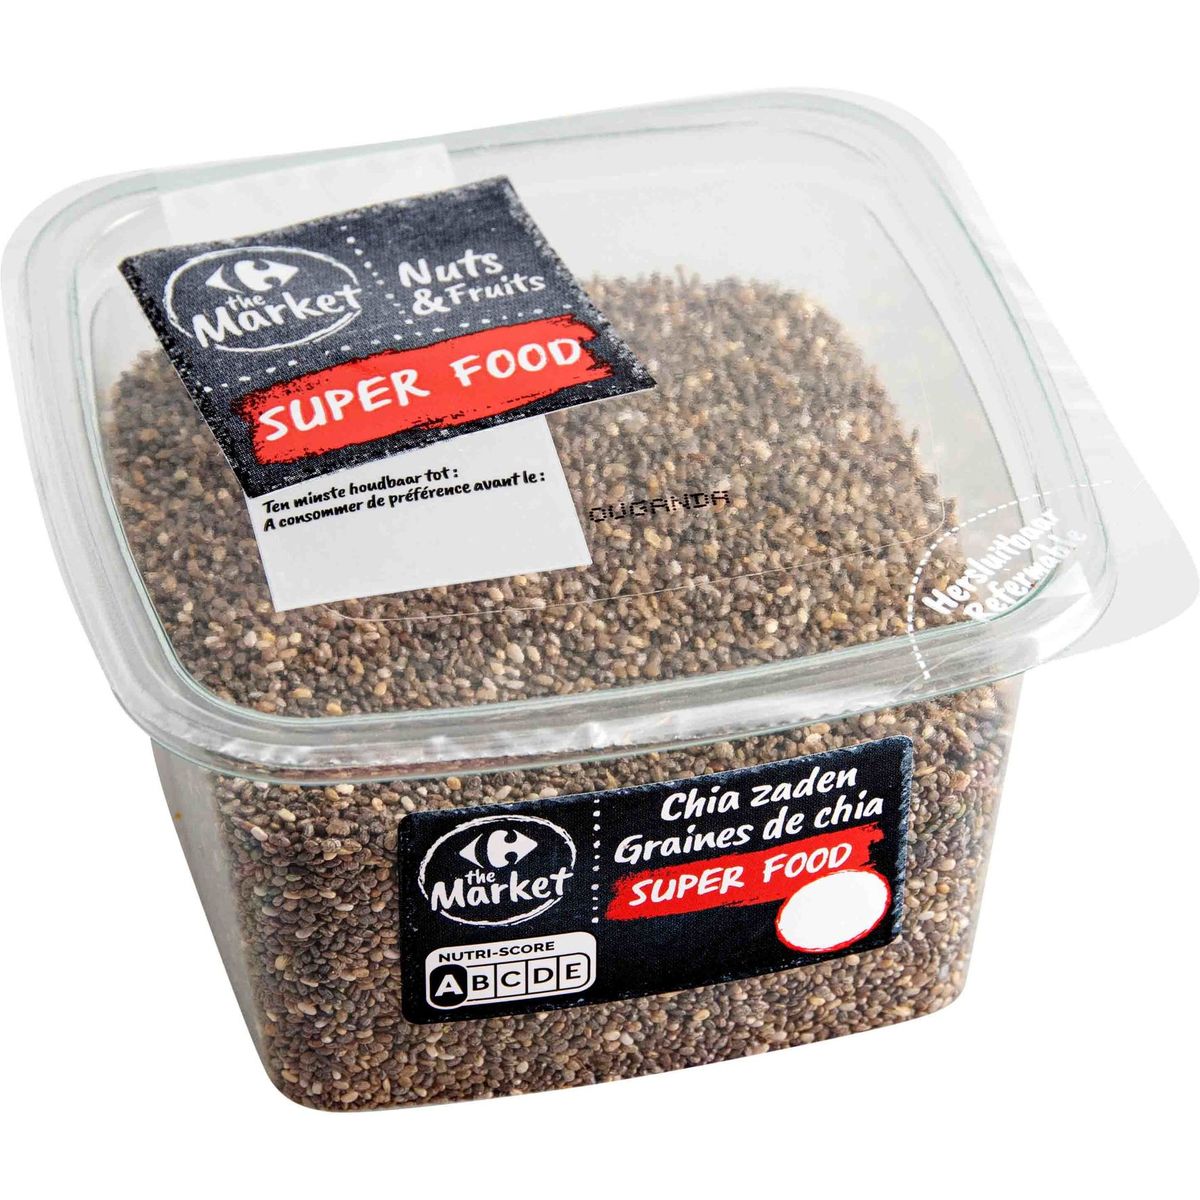 Carrefour The Market Nuts & Fruits Super Food Chia Zaden 160 g